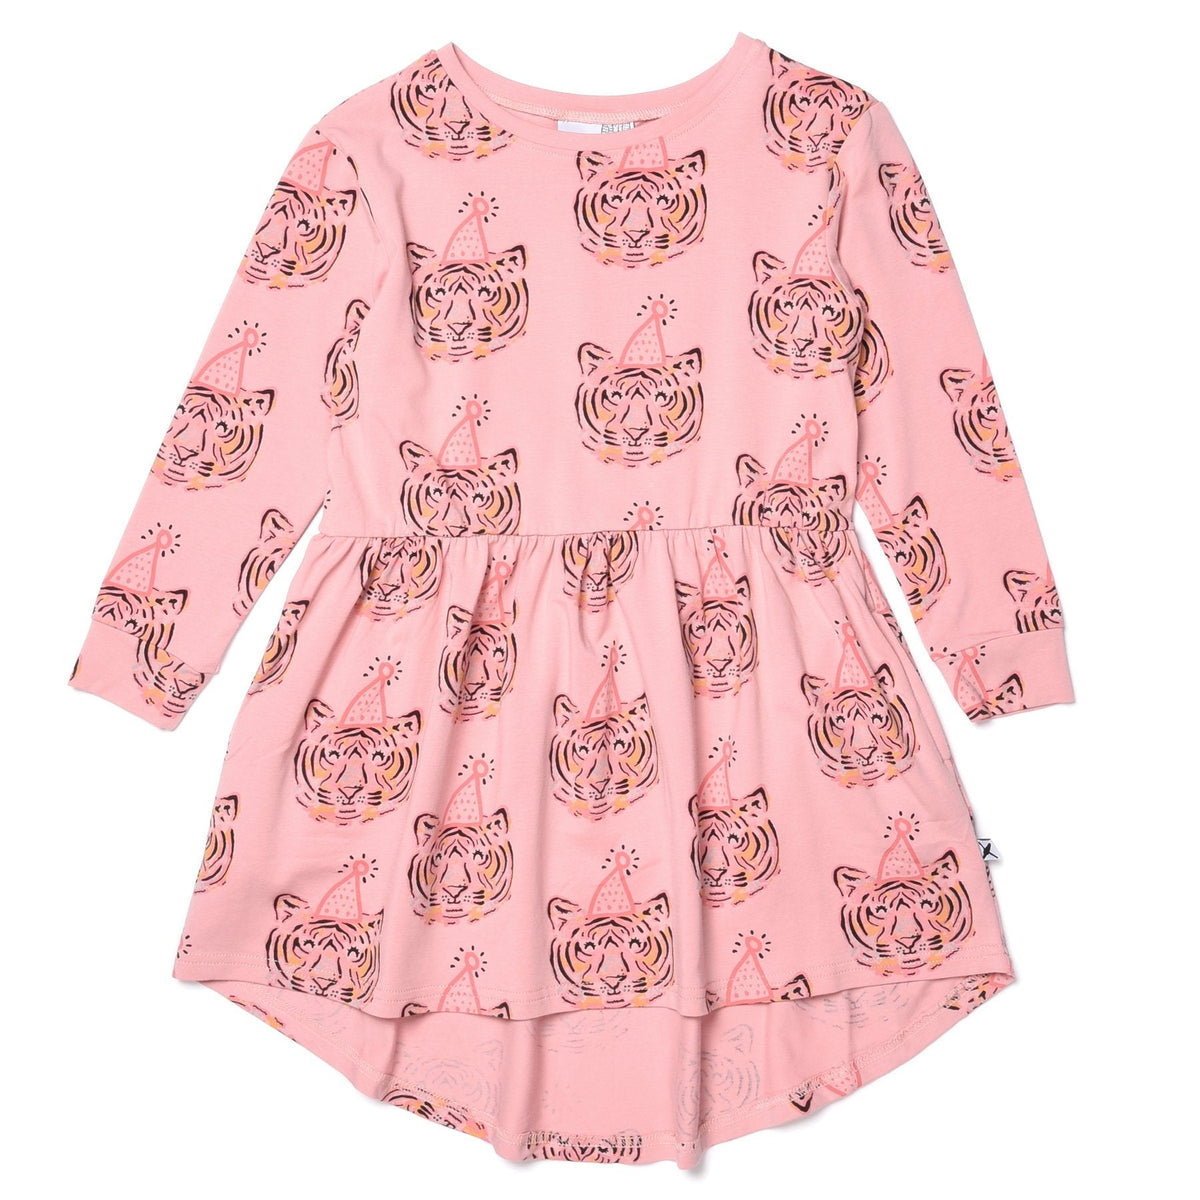 Party Tigers Dress - Light Rose